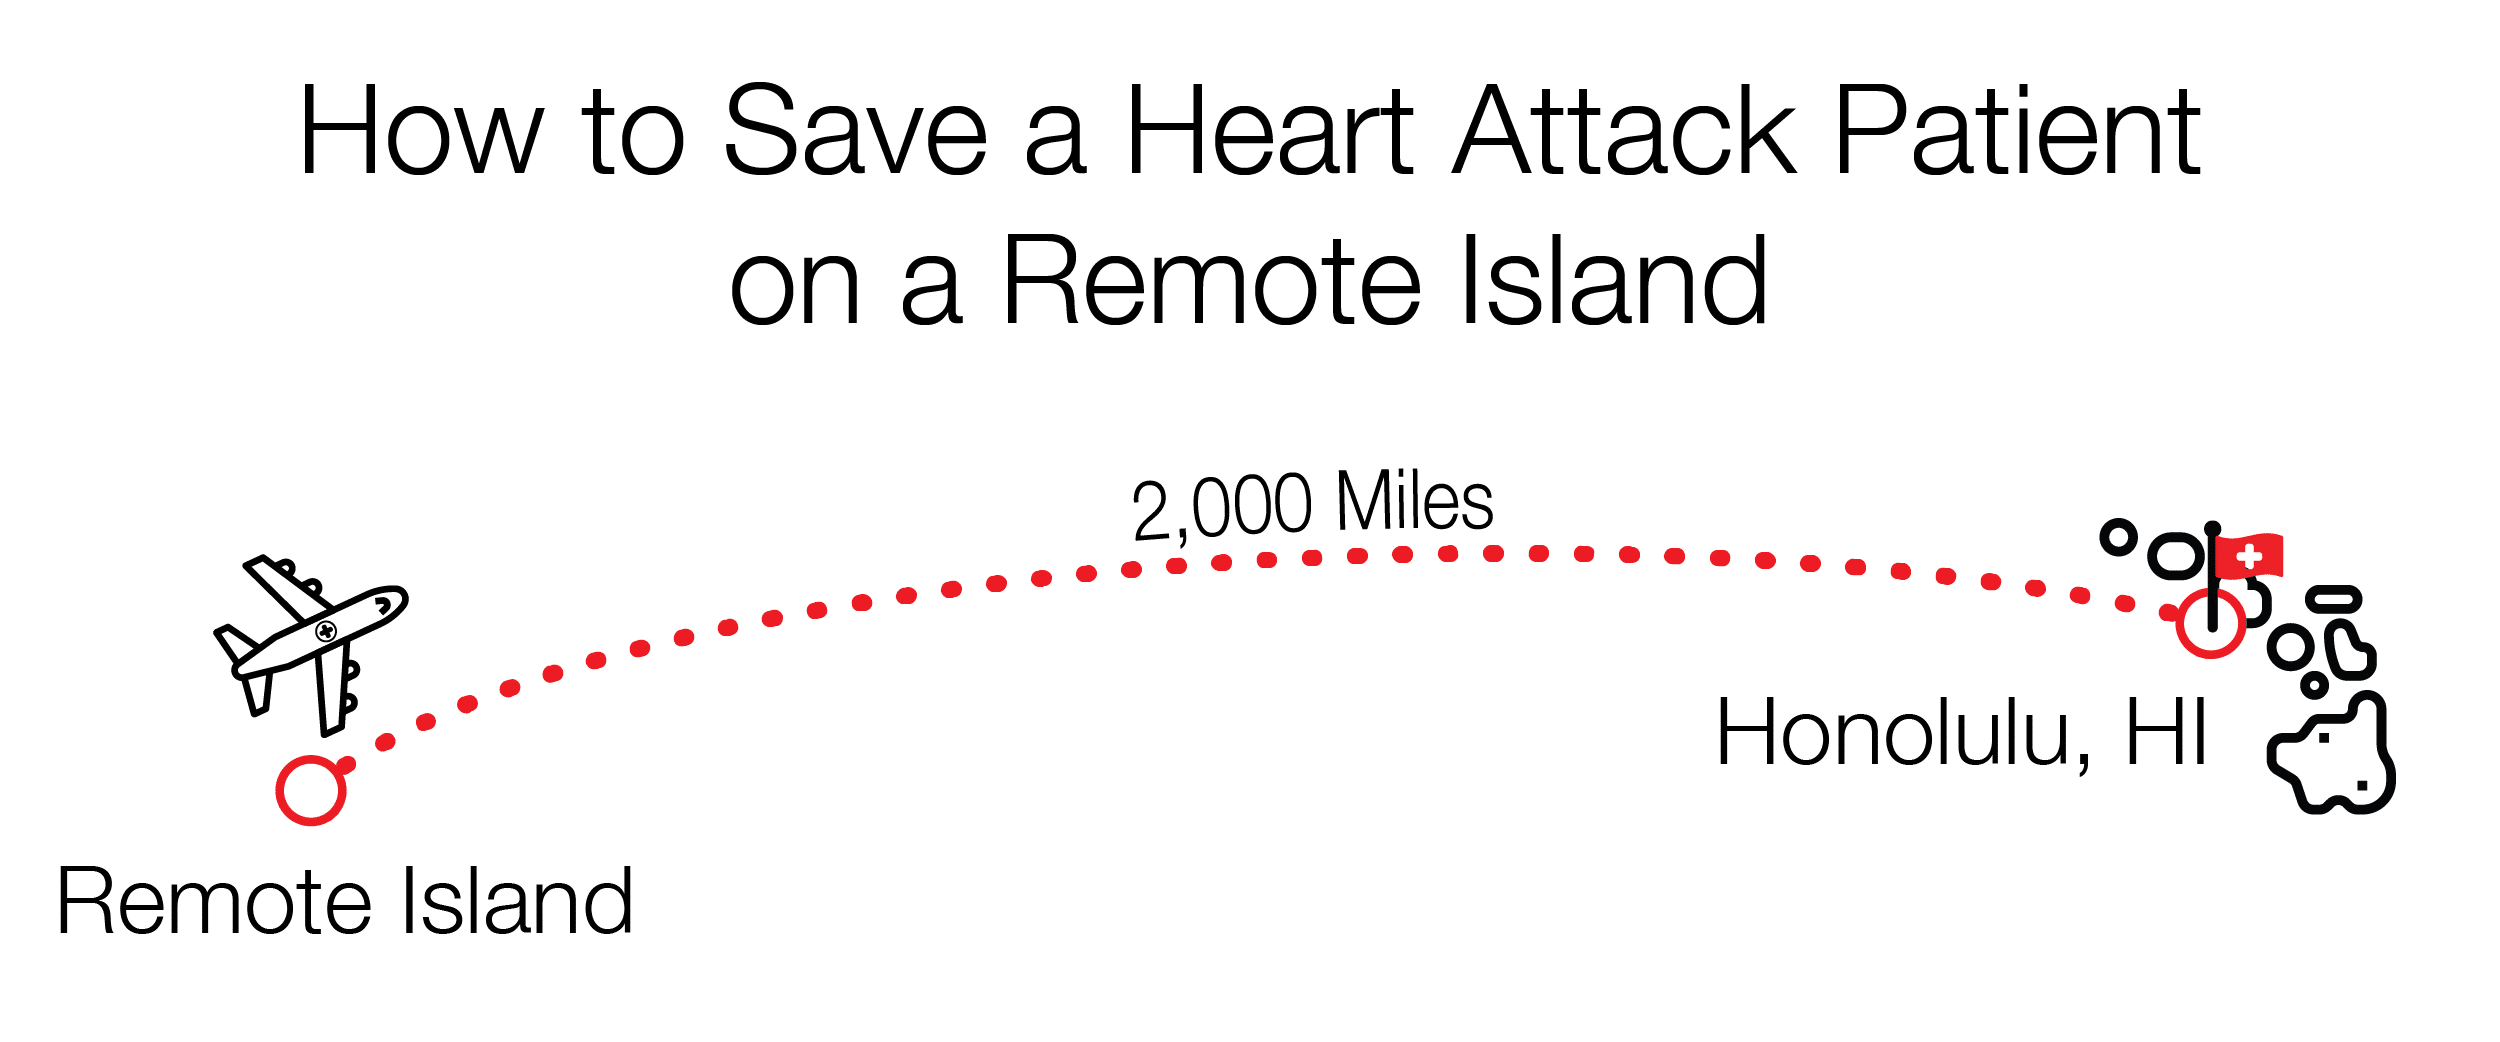 Remote Medical International Saves Heart Attack Patient on Remote Island